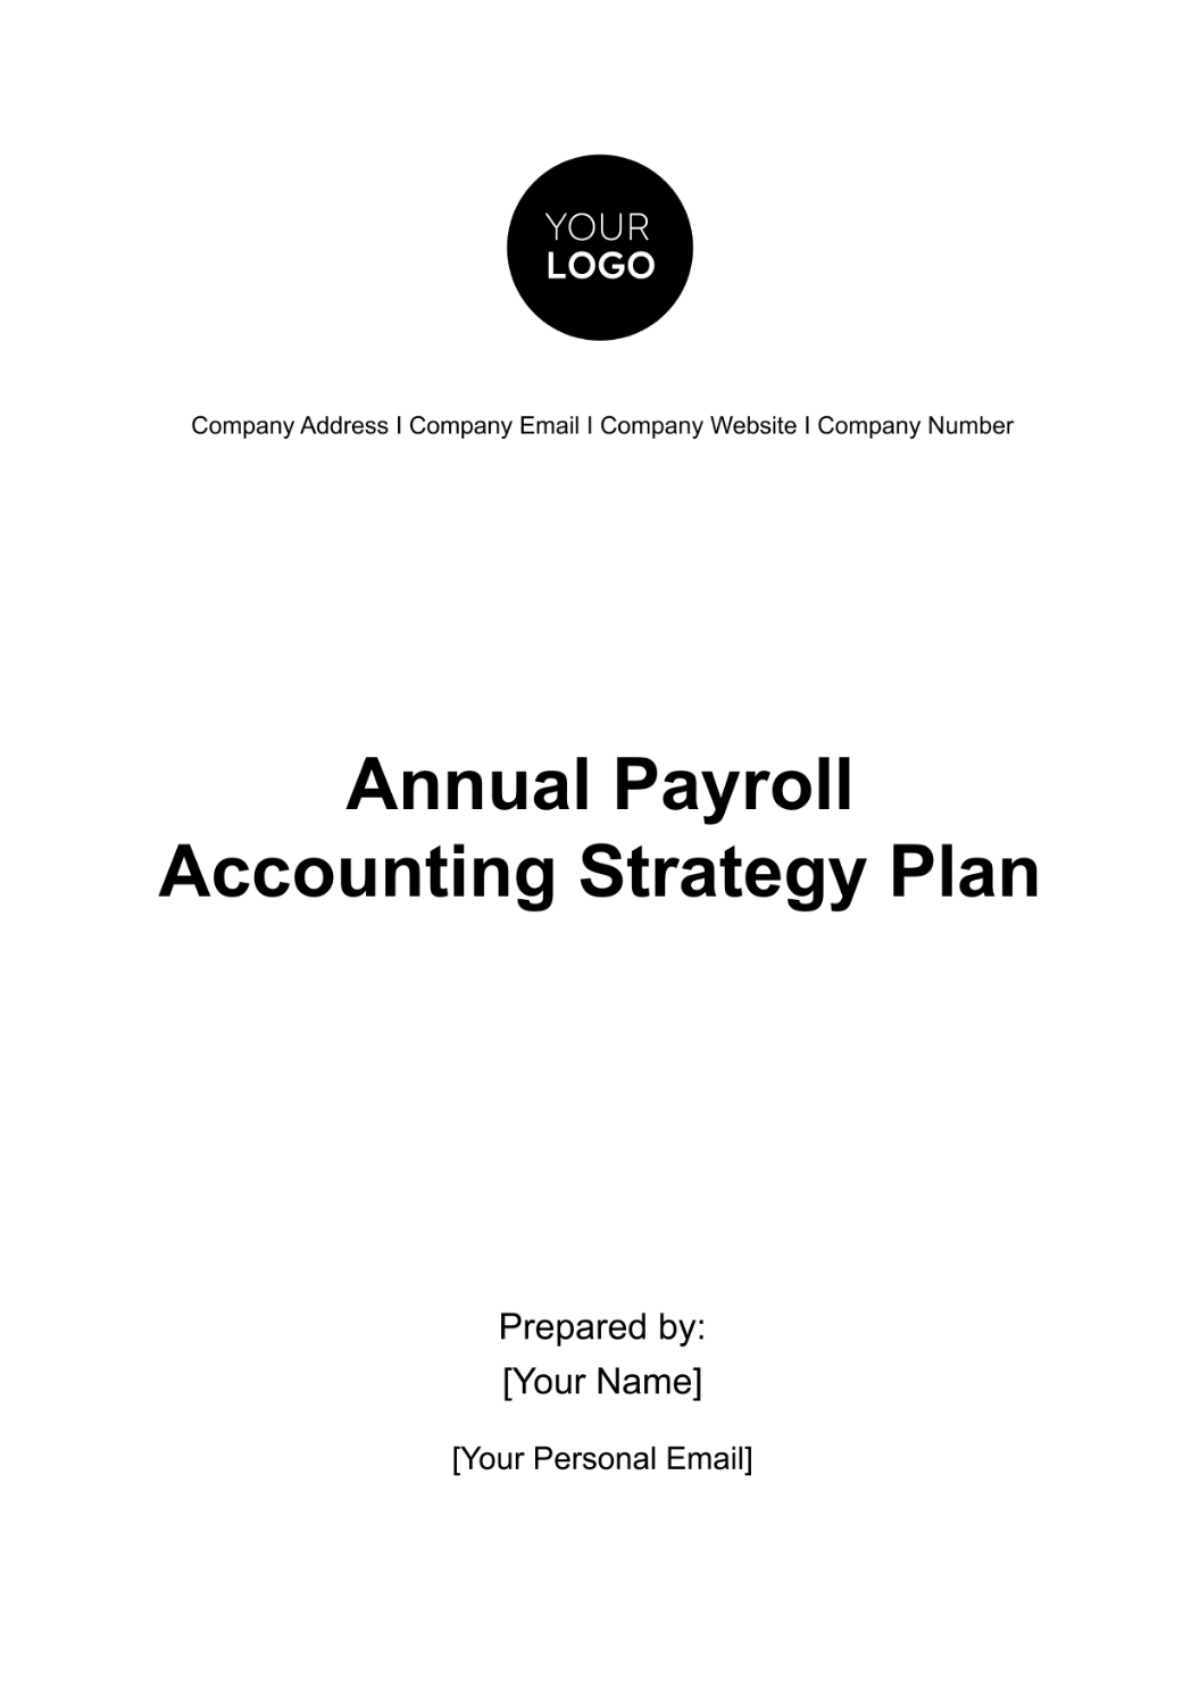 Annual Payroll Accounting Strategy Plan Template